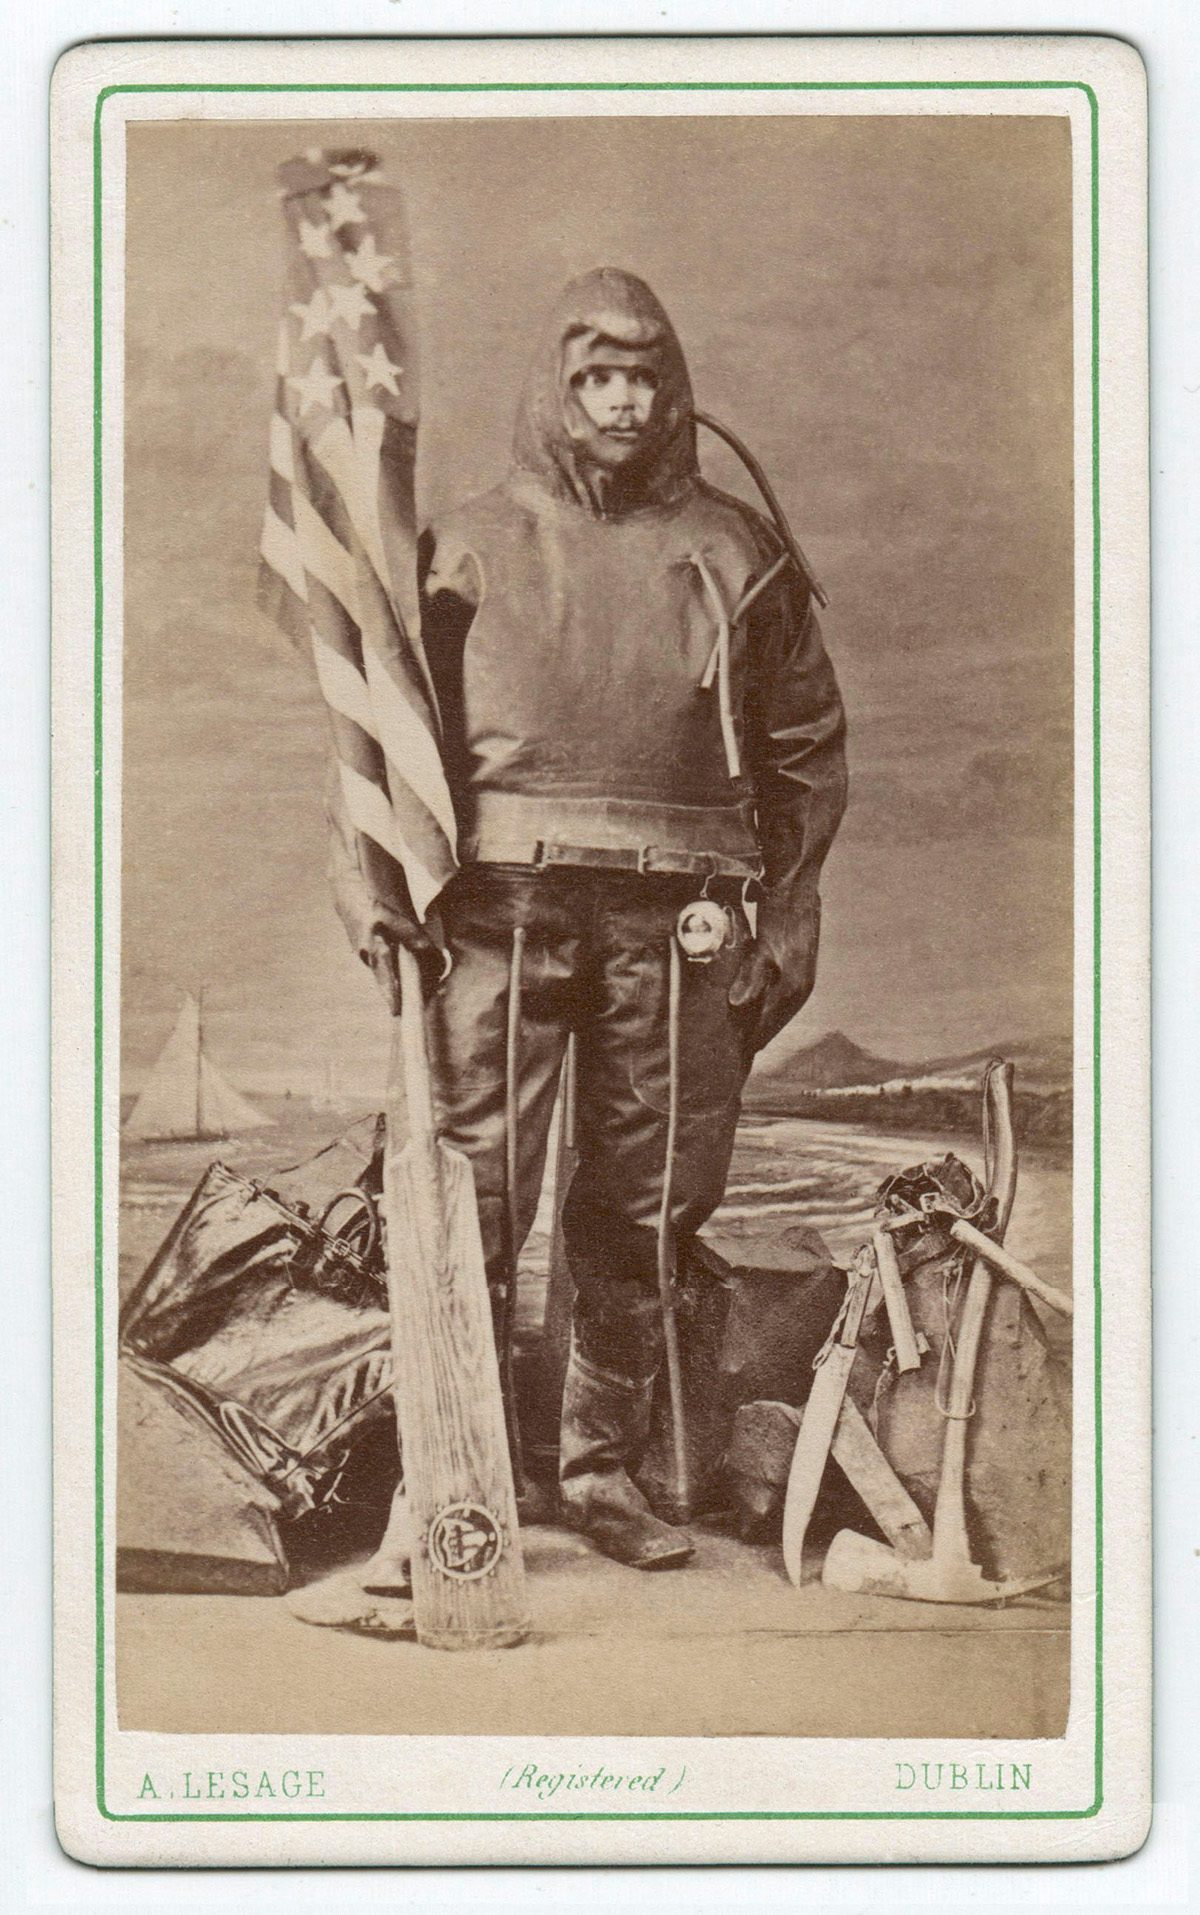 Sepia toned photograph of an explorer wearing specialist clothing holding a flag